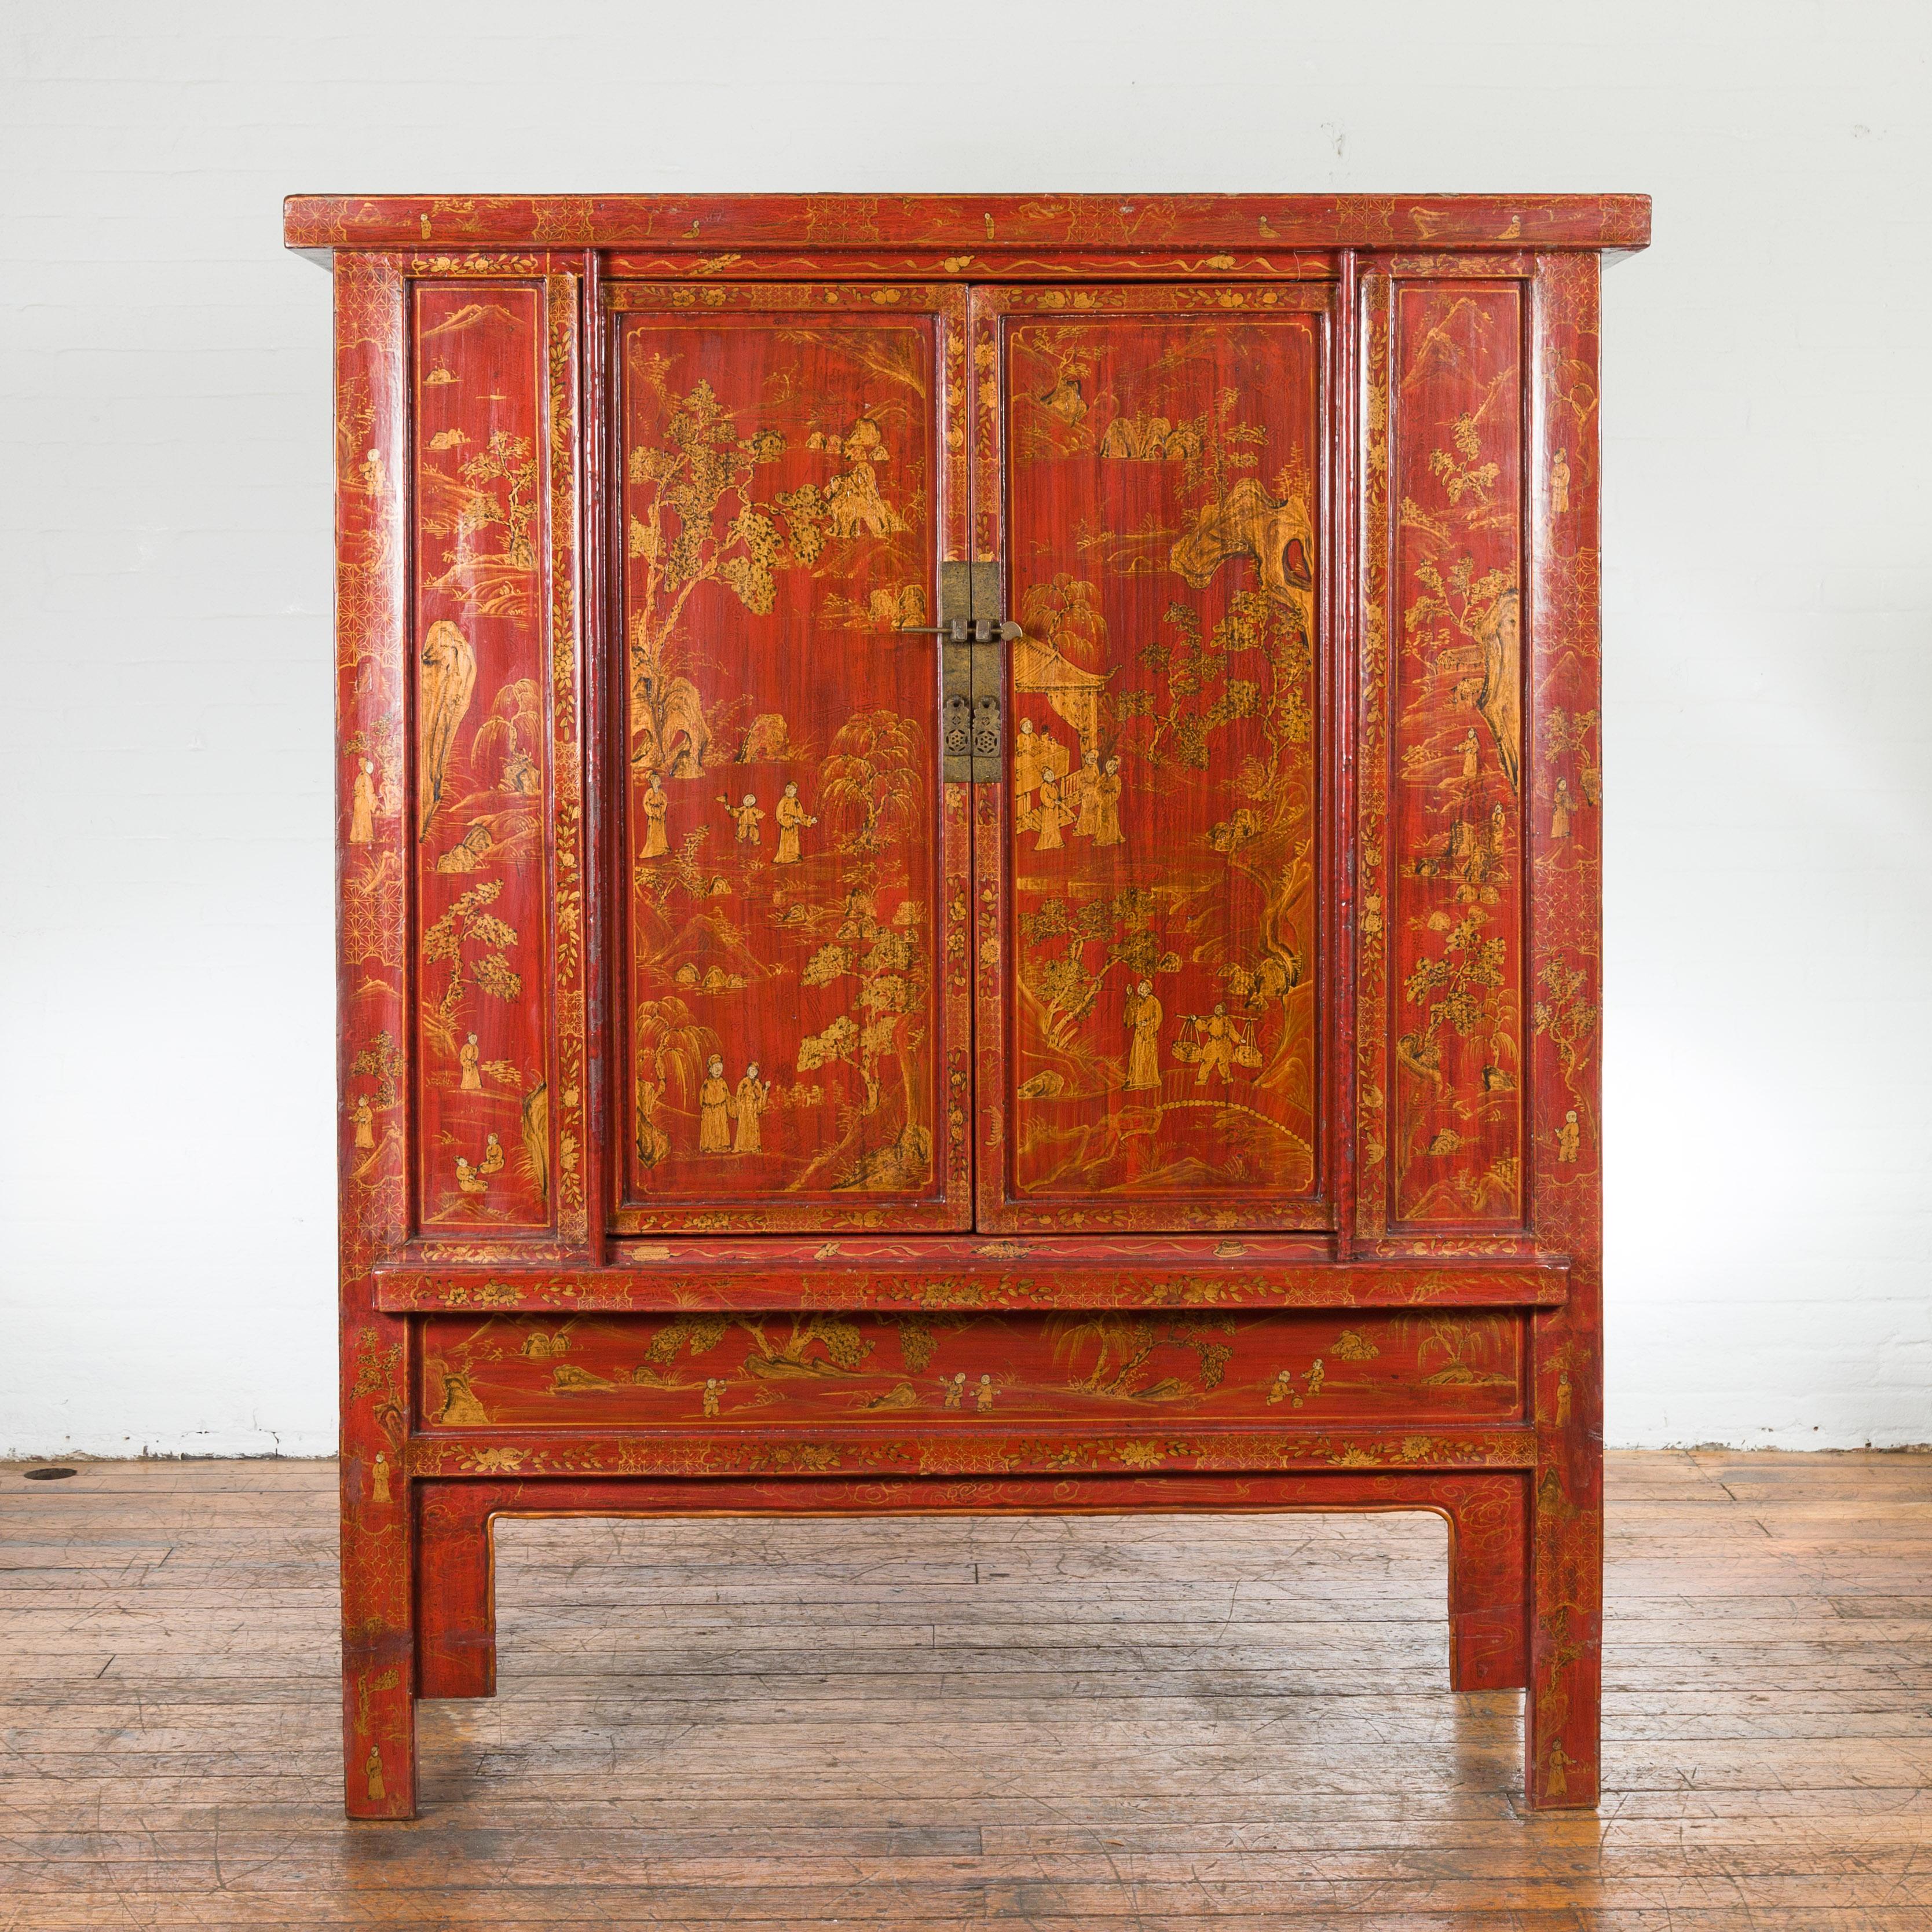 A Chinese Qing Dynasty period large armoire from the 19th century with red lacquer, gilt décor, two doors and front apron. Created in China during the Qing Dynasty period in the 19th century, this large armoire features a linear silhouette perfectly